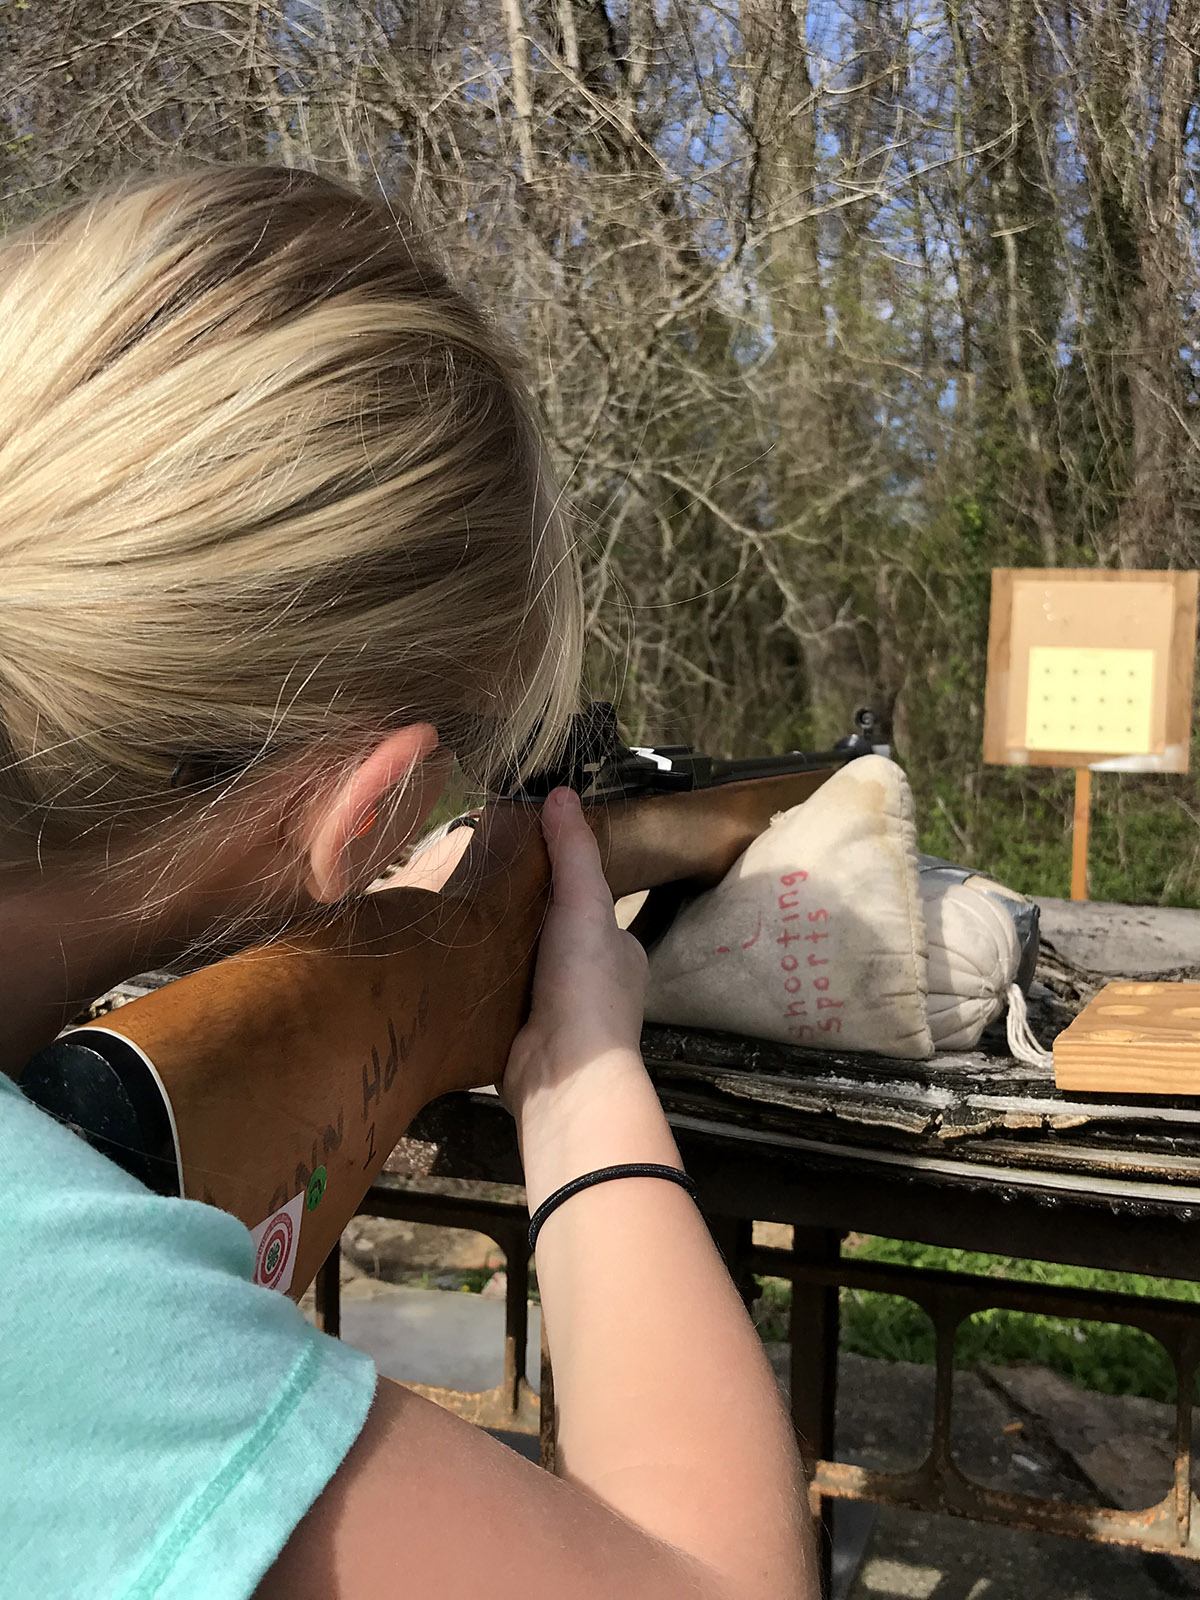 A girl shooting a rifle at a target during a Shooting Sports event.